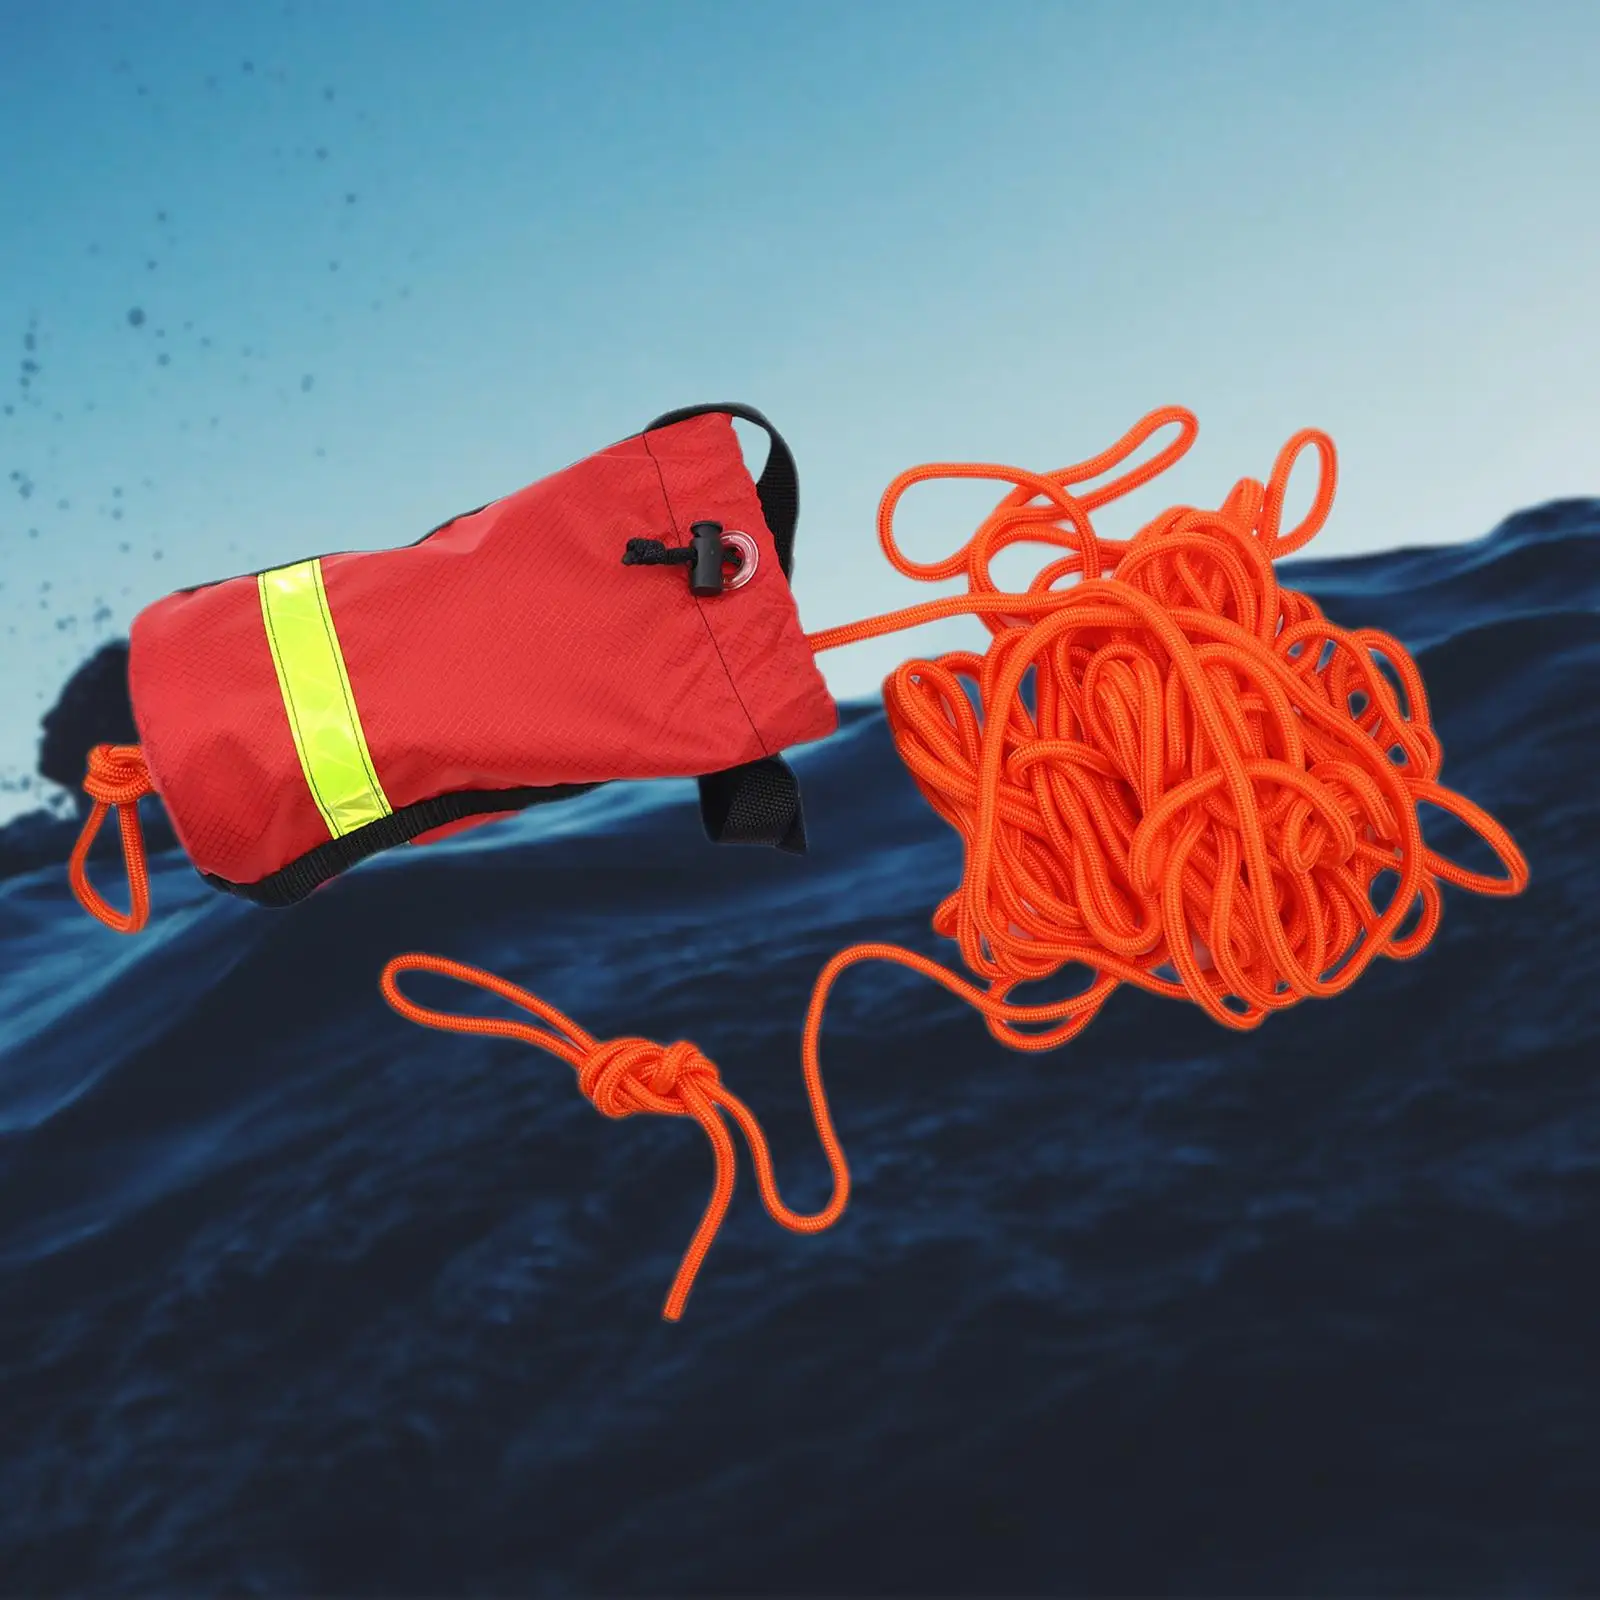 101.7ft Floating Throwable Rope Emergency Marine Equipment Accessories Boat